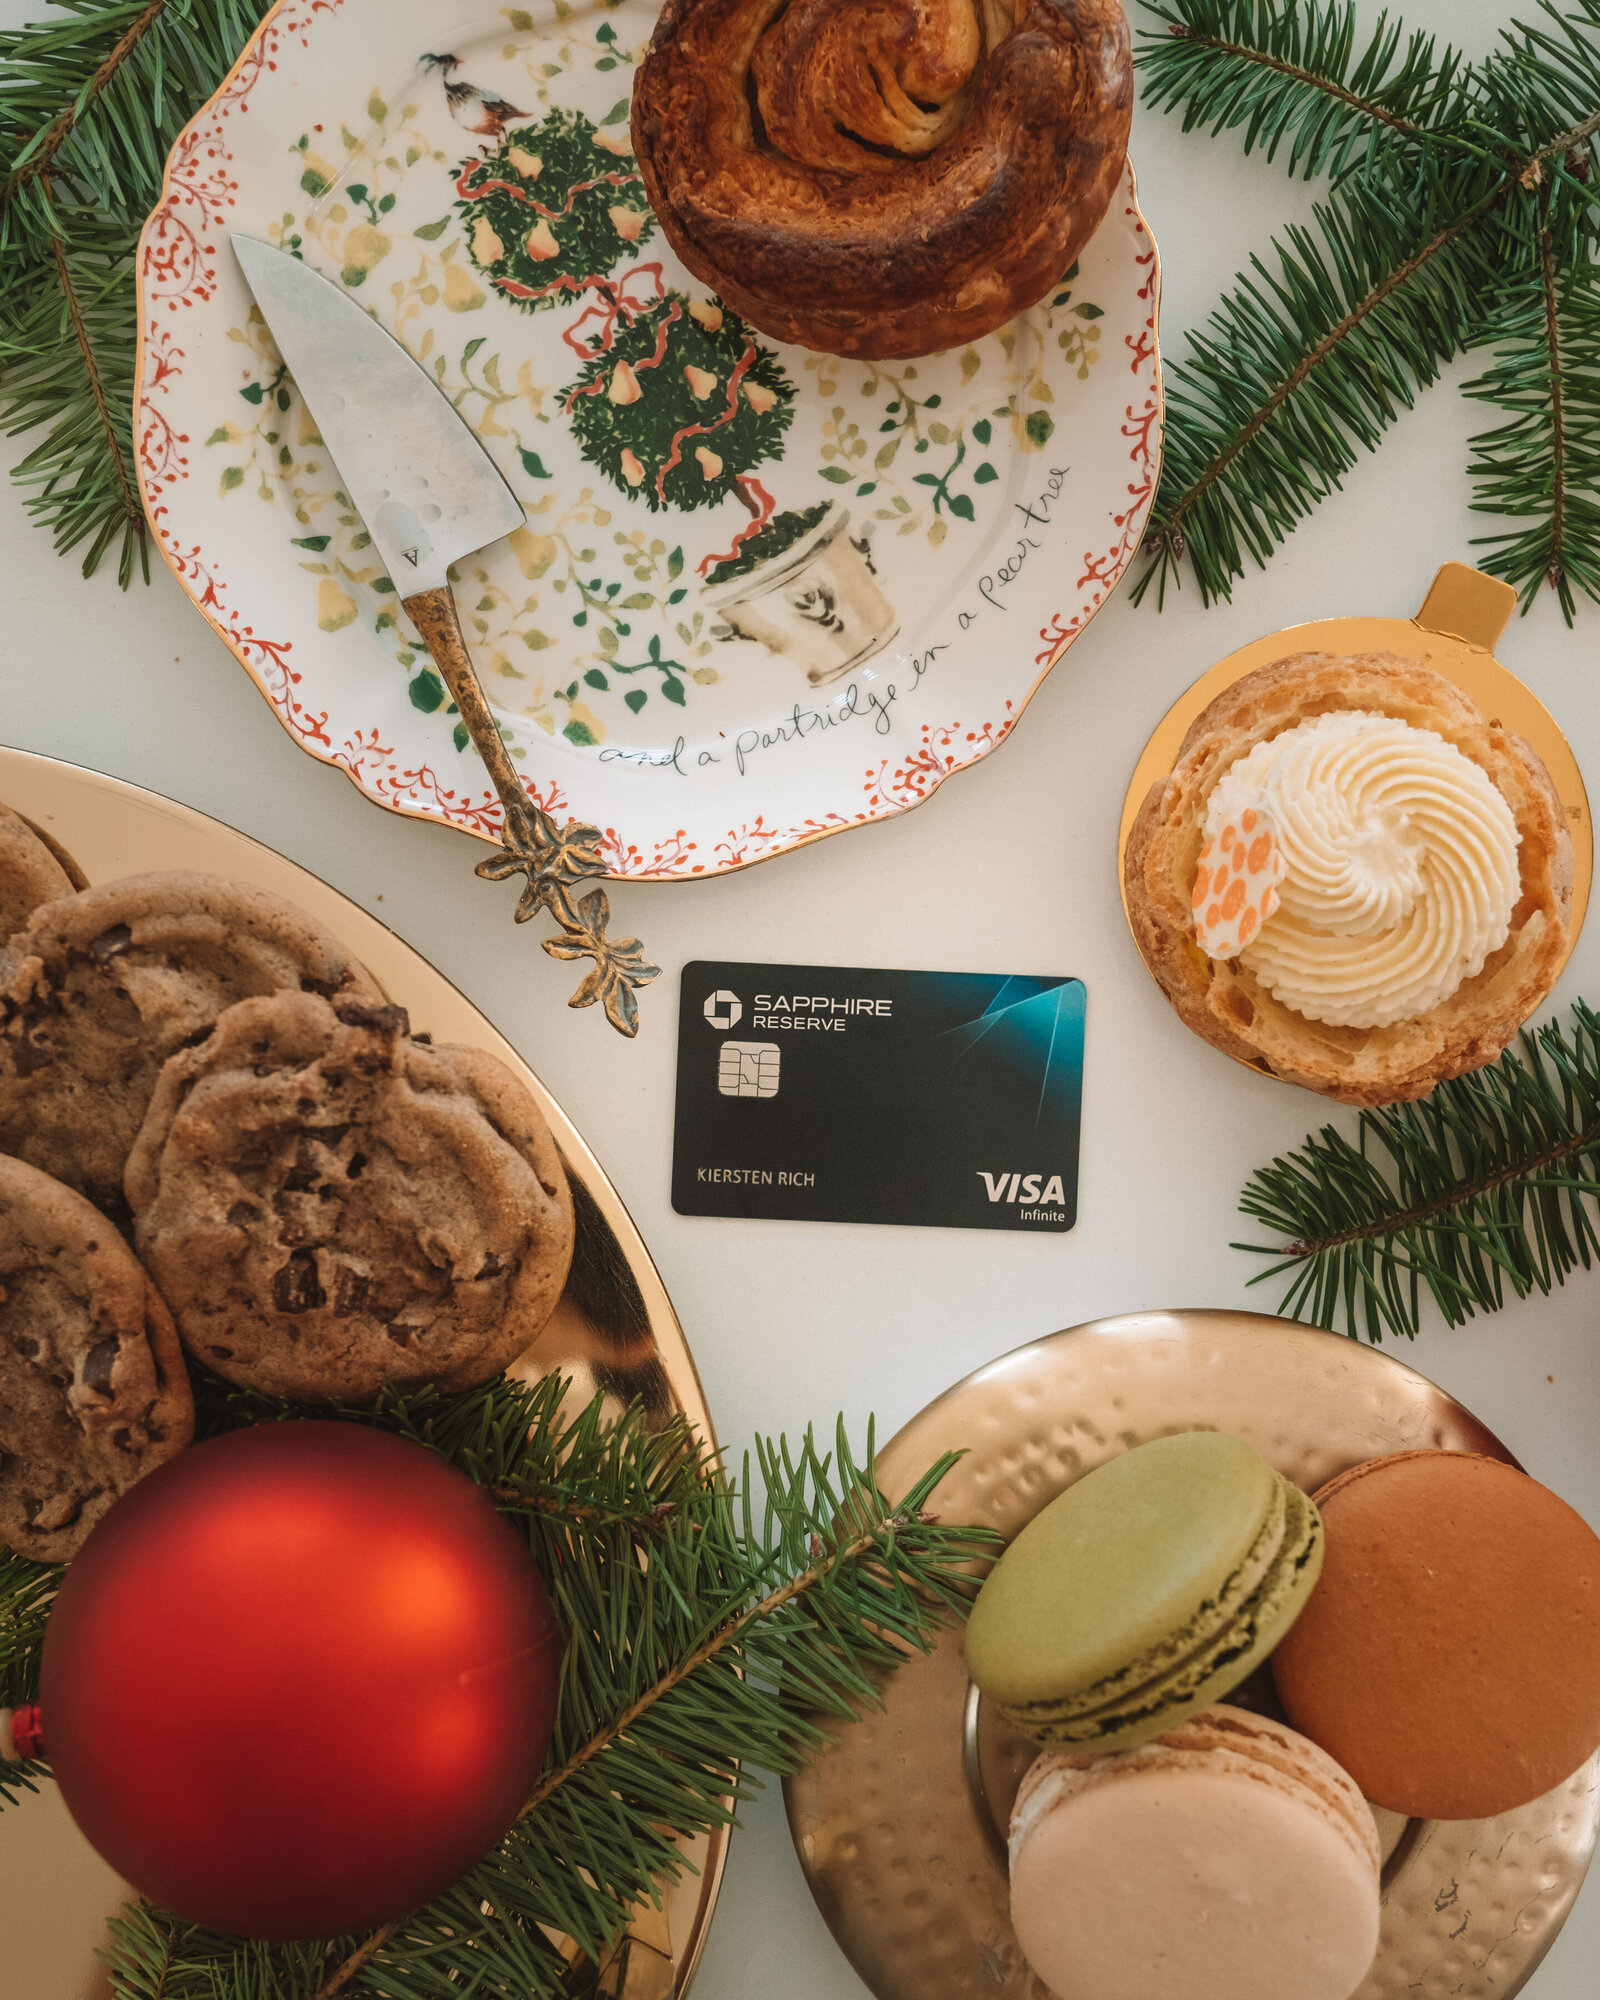 Chase Sapphire travel credit card flat lay Christmas desserts macarons. Styled holiday flat lay by product photographer Chelsea Loren.